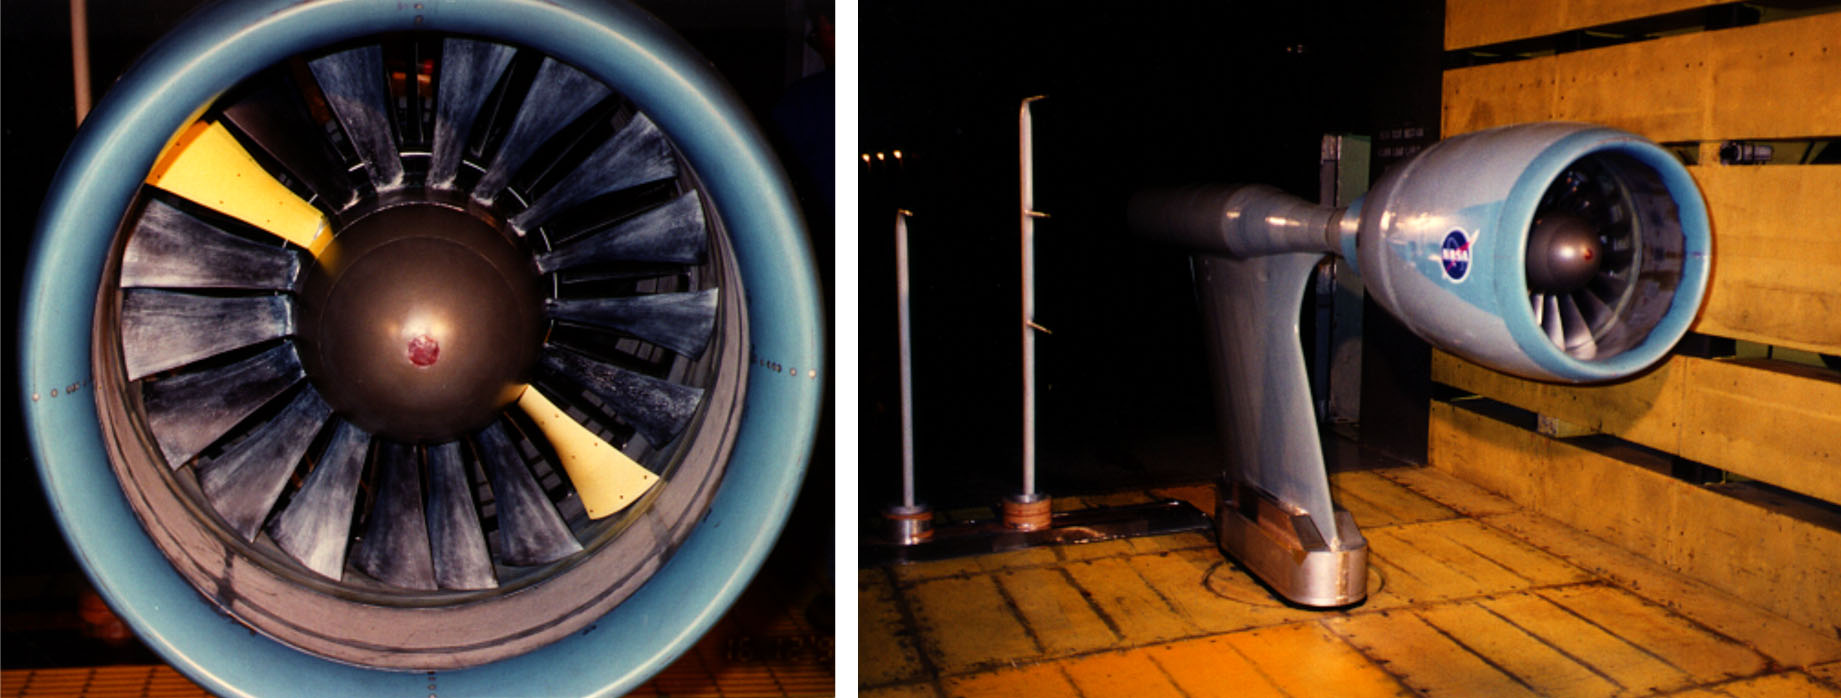 Two images. Left image shows a close up front view of the Temperature-Sensitive Paint on rotating fan blades. Righ images shows a side image of the same rotating fan.